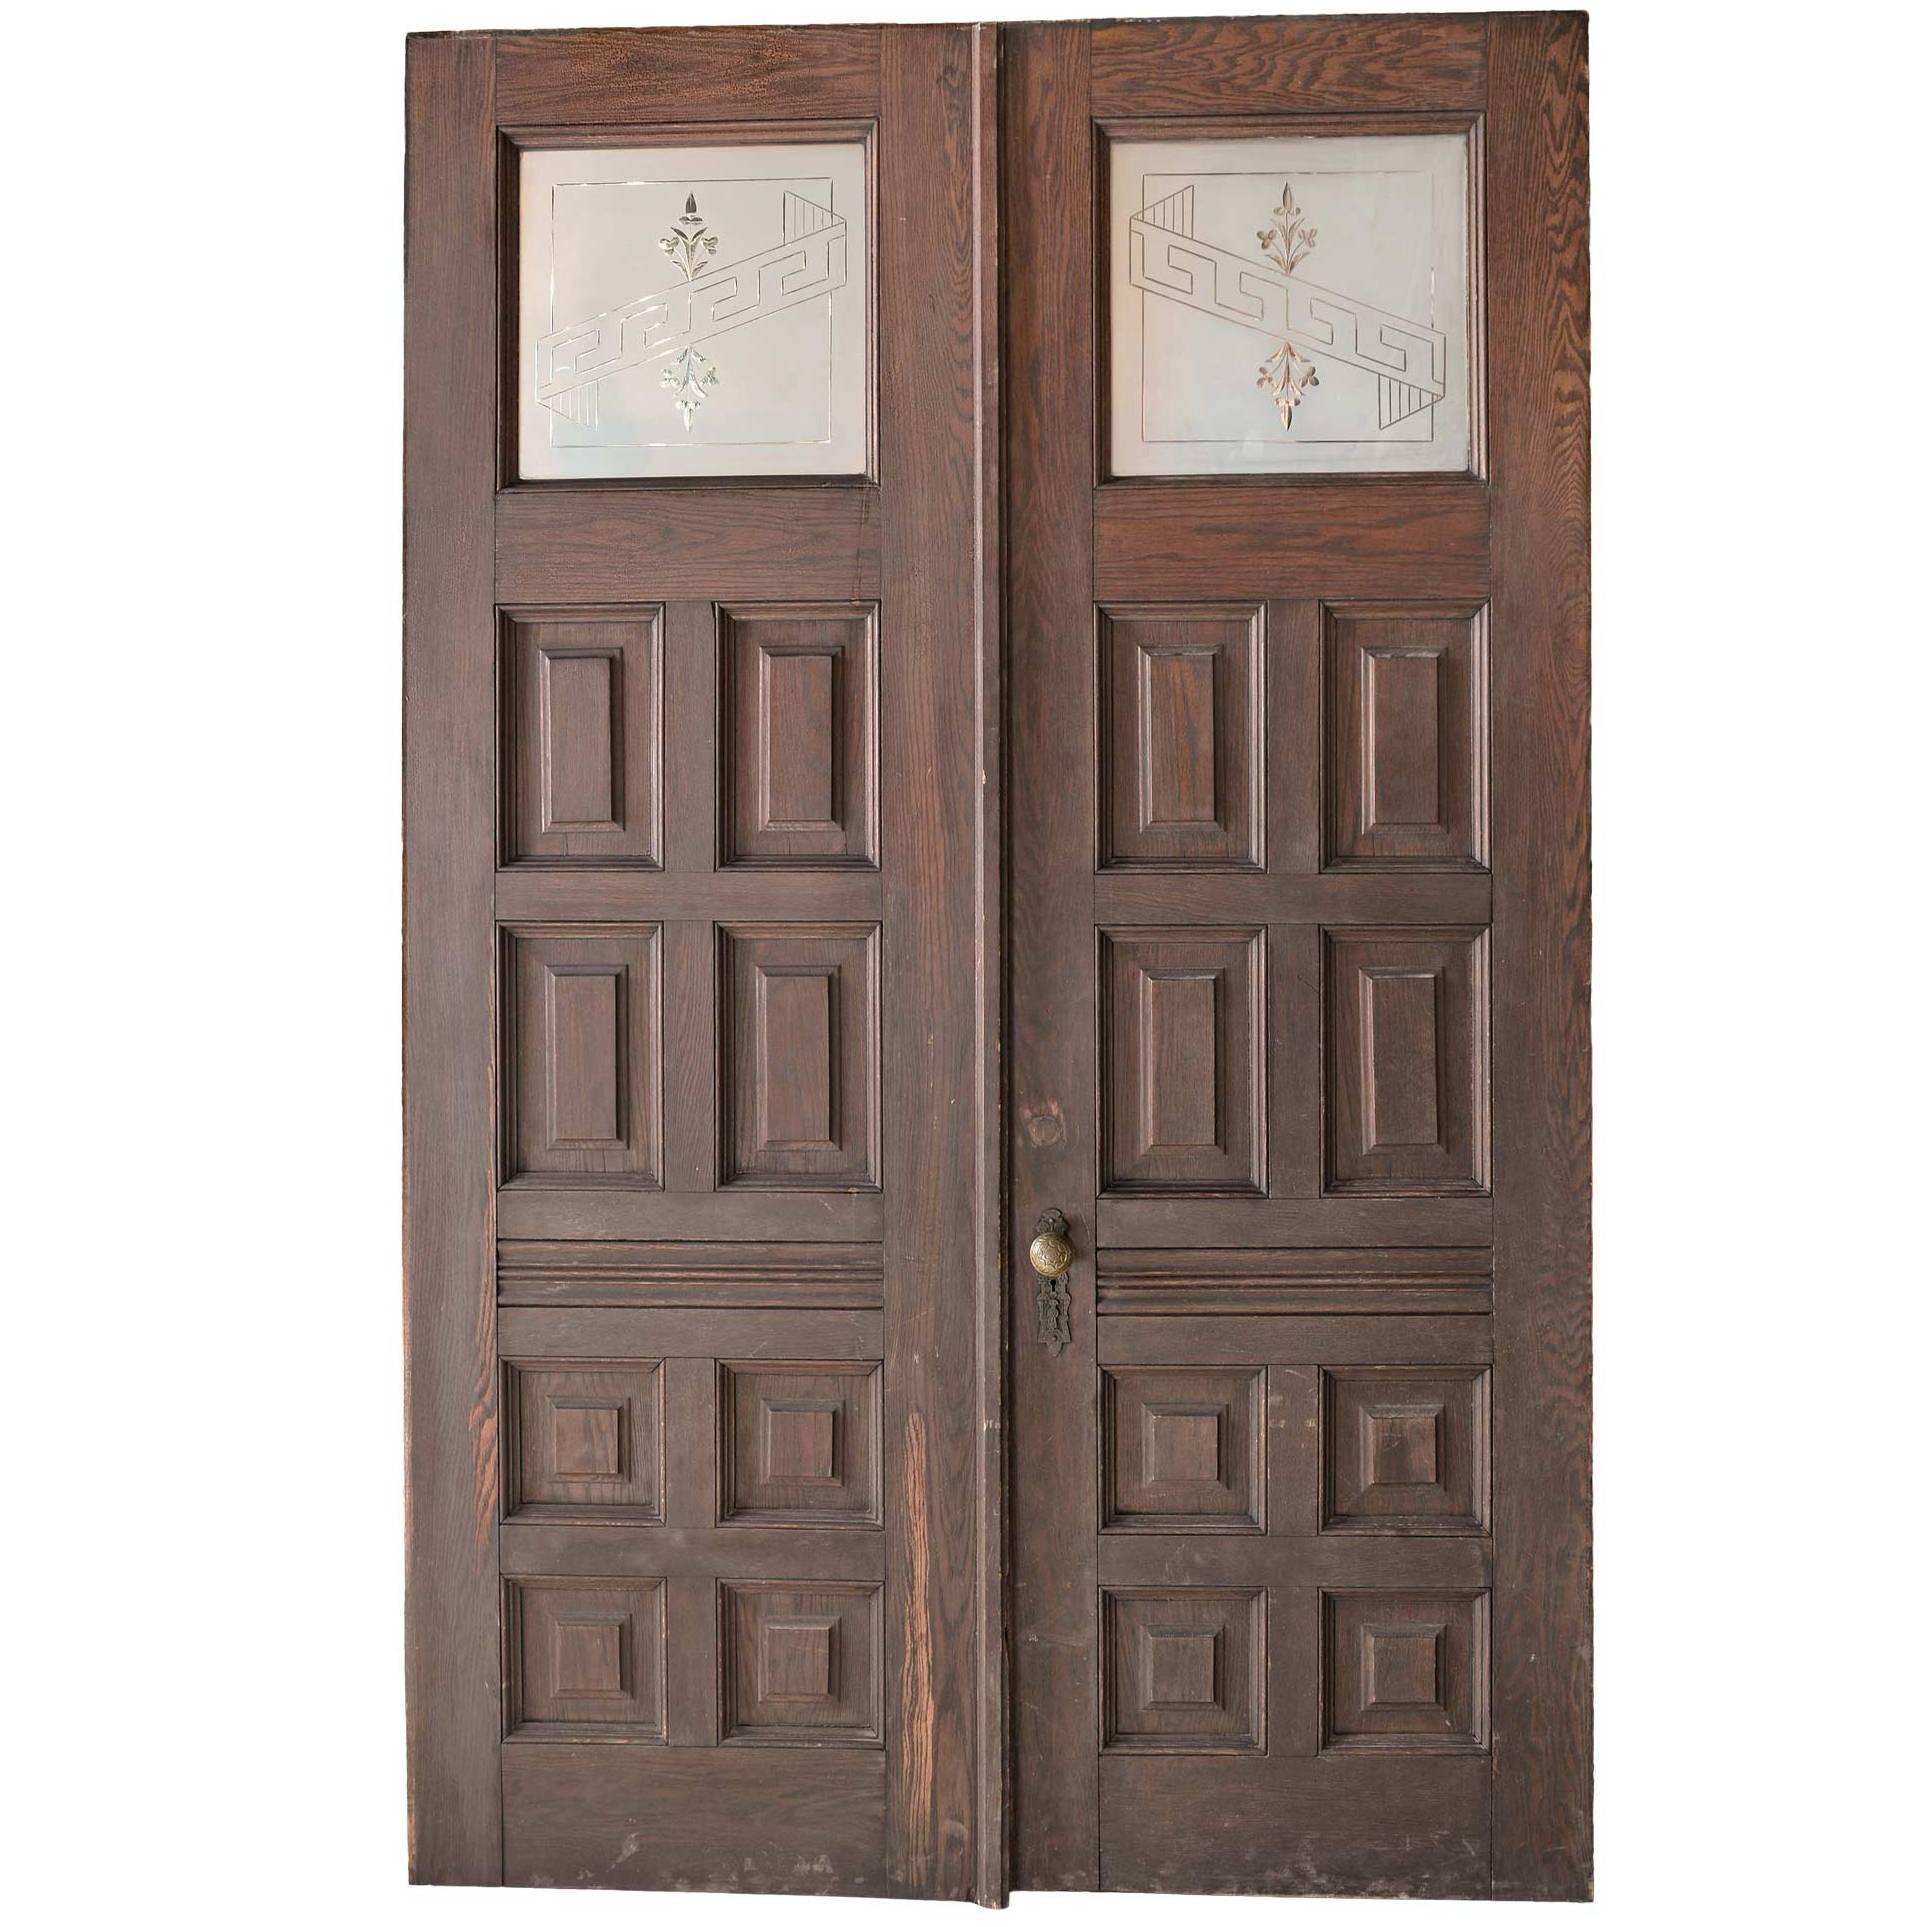 Early Victorian Entry Door Pair with Original Hardware and Etched Glass Panels